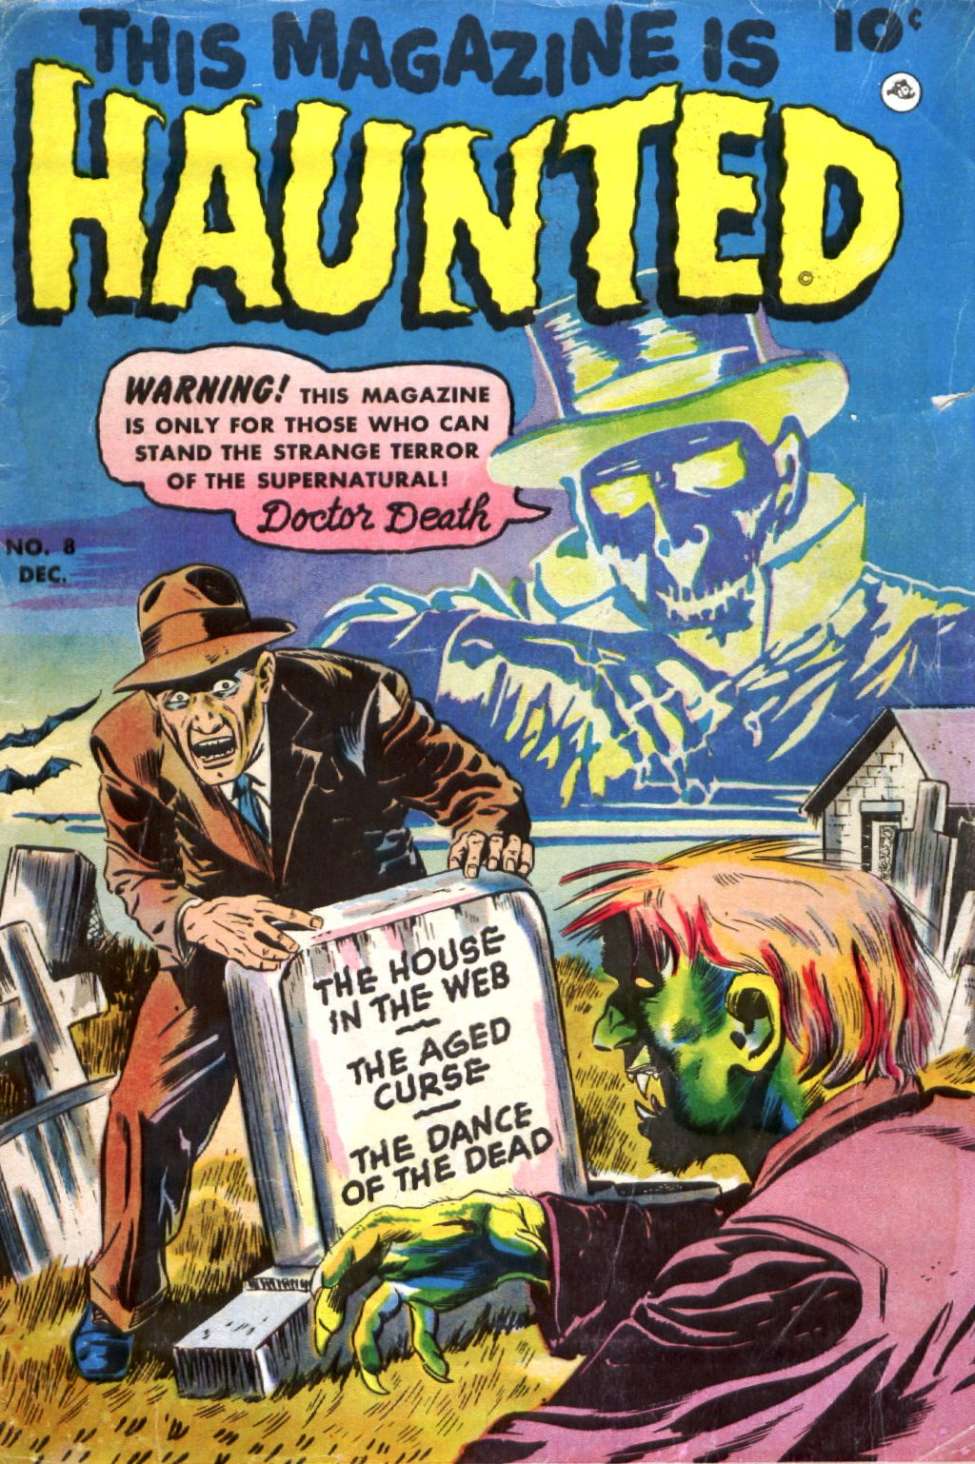 Book Cover For This Magazine Is Haunted 8